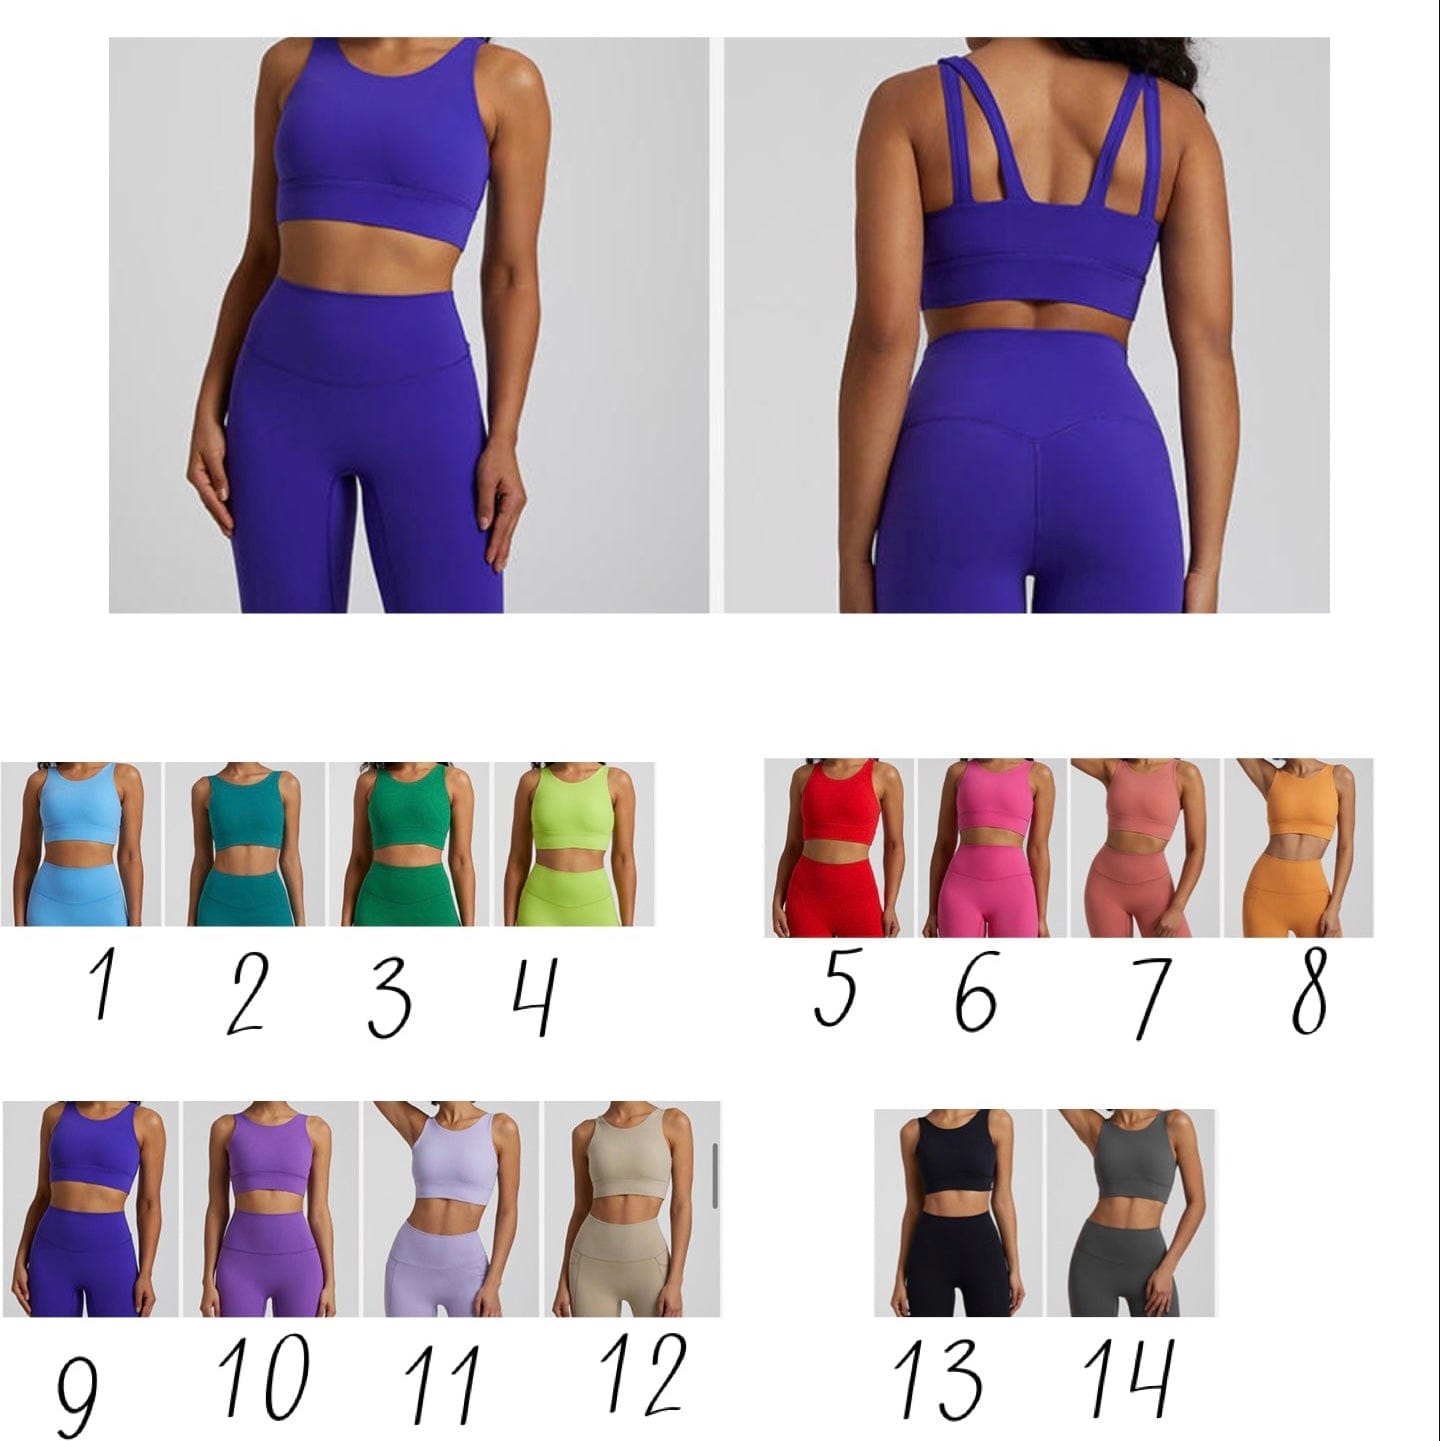 Elite double strap bra (to be paired with Elite seamless shorts)